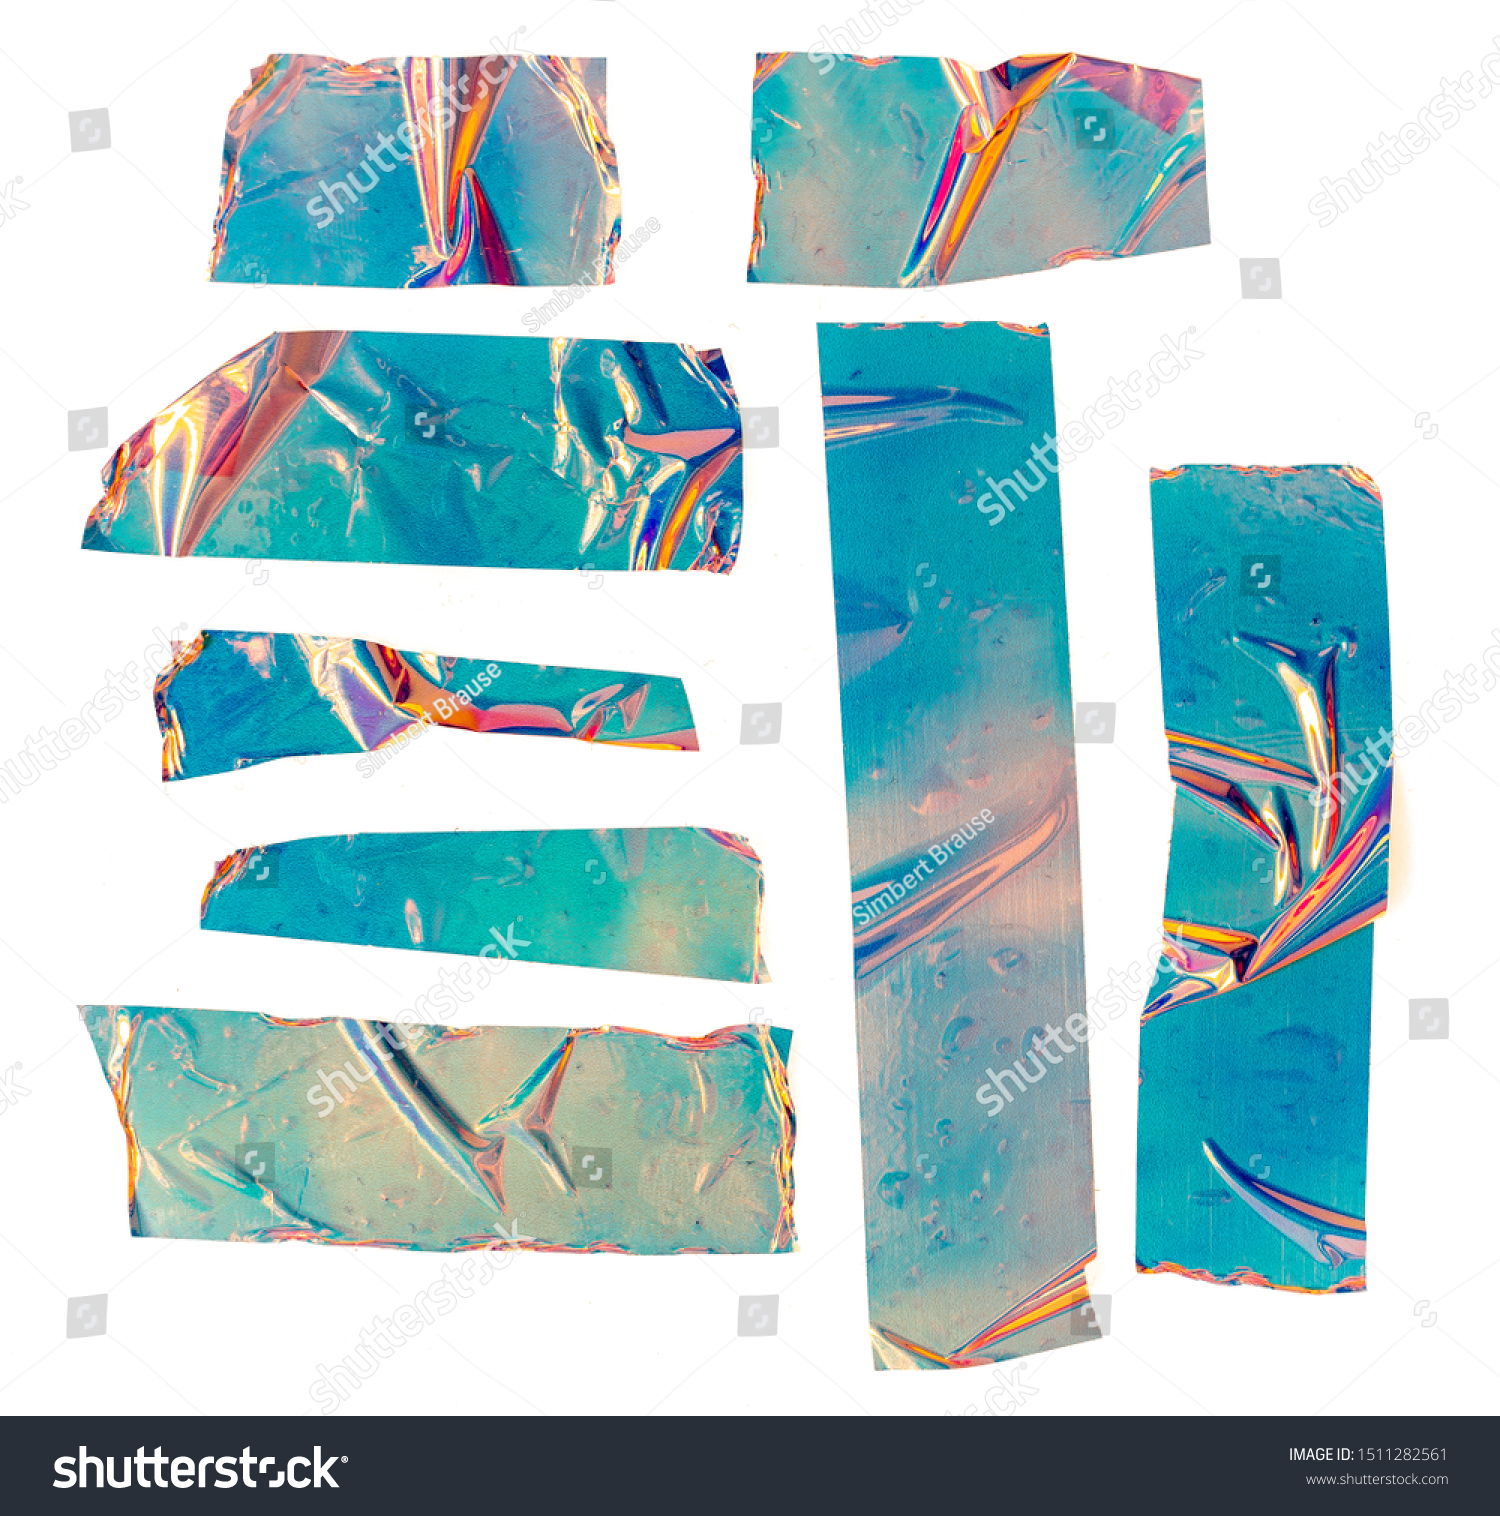 Shiny crumpled stickers. Cool set of metallic holographic sticky tape shapes cuts isolated on white background. Holo glitter stripes or snips. #1511282561